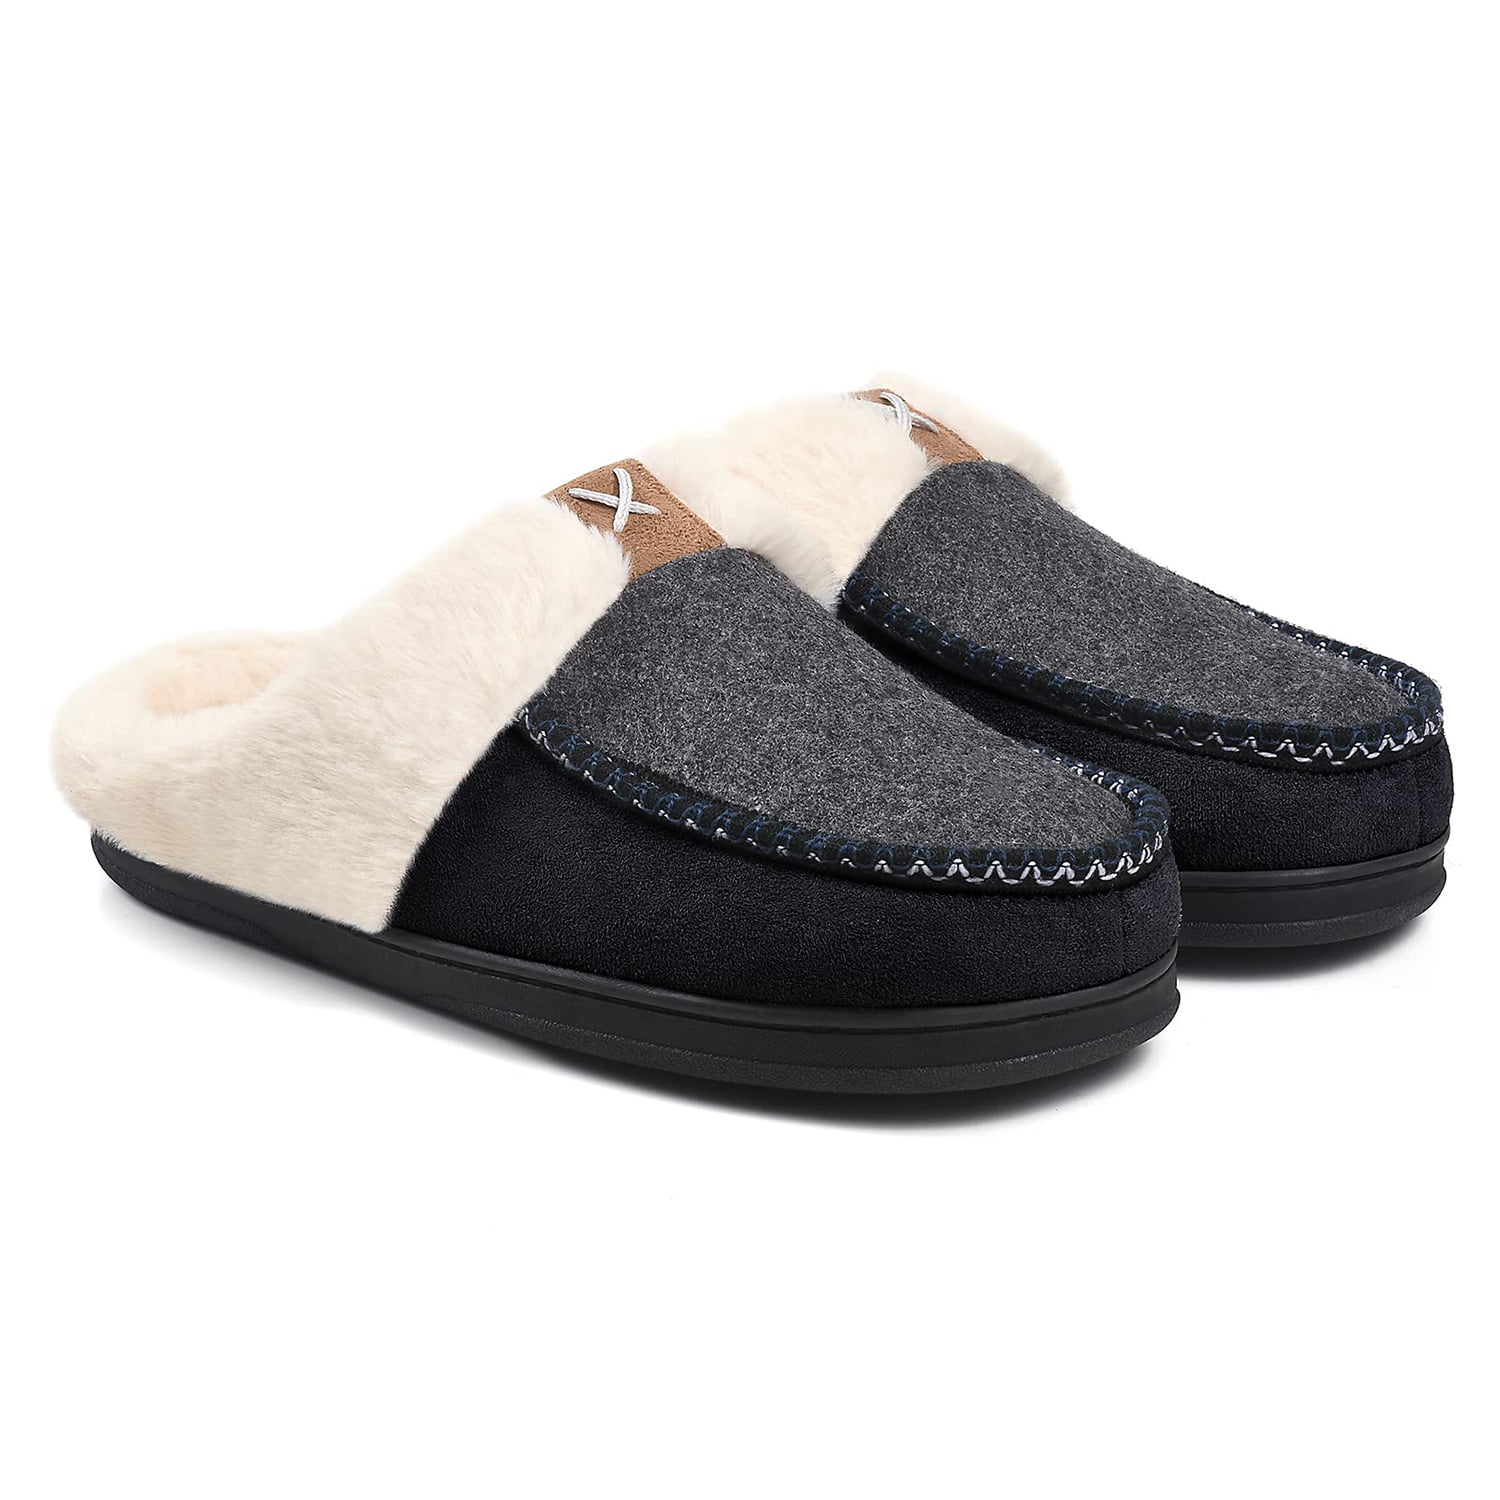 Men's Cozy Memory Foam Slippers with Warm Fleece Lining,Closed Back House Shoes Soft Non-Slip Rubber Sole Indoor Outdoor Christmas Gift 